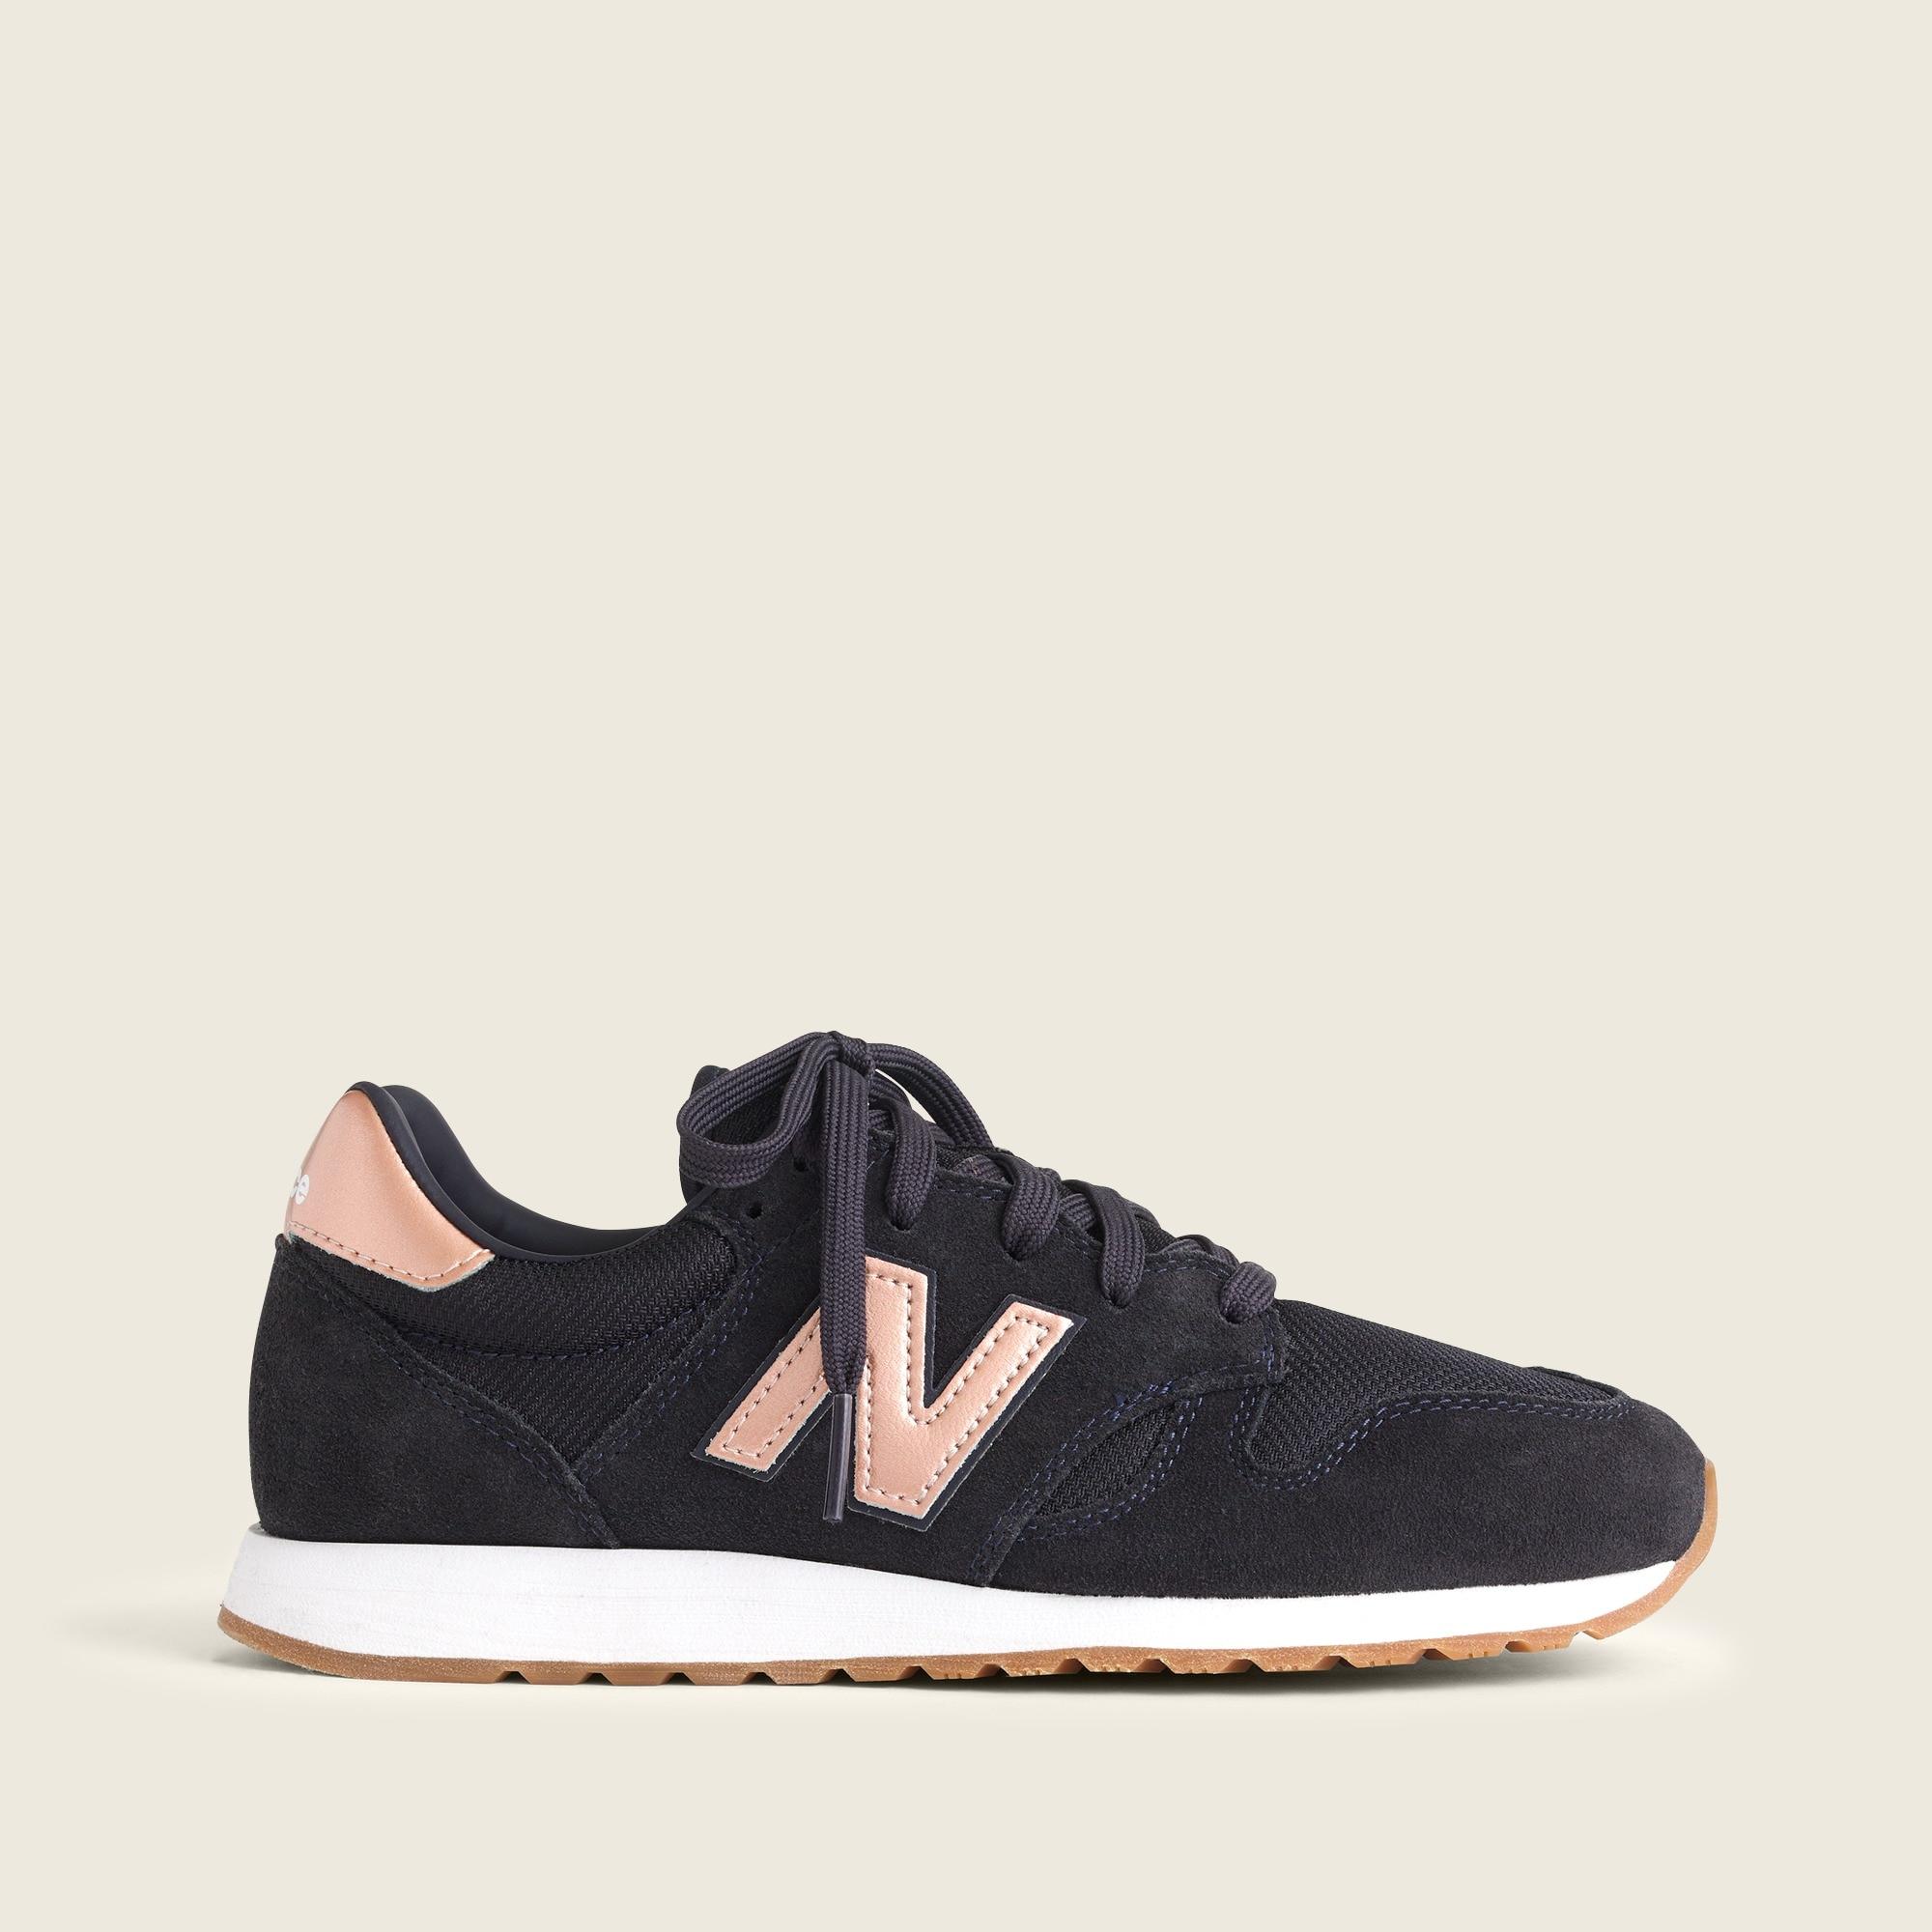 New Balance Suede ® For J.crew 520 Sneakers in Navy Rose Gold (Blue) | Lyst